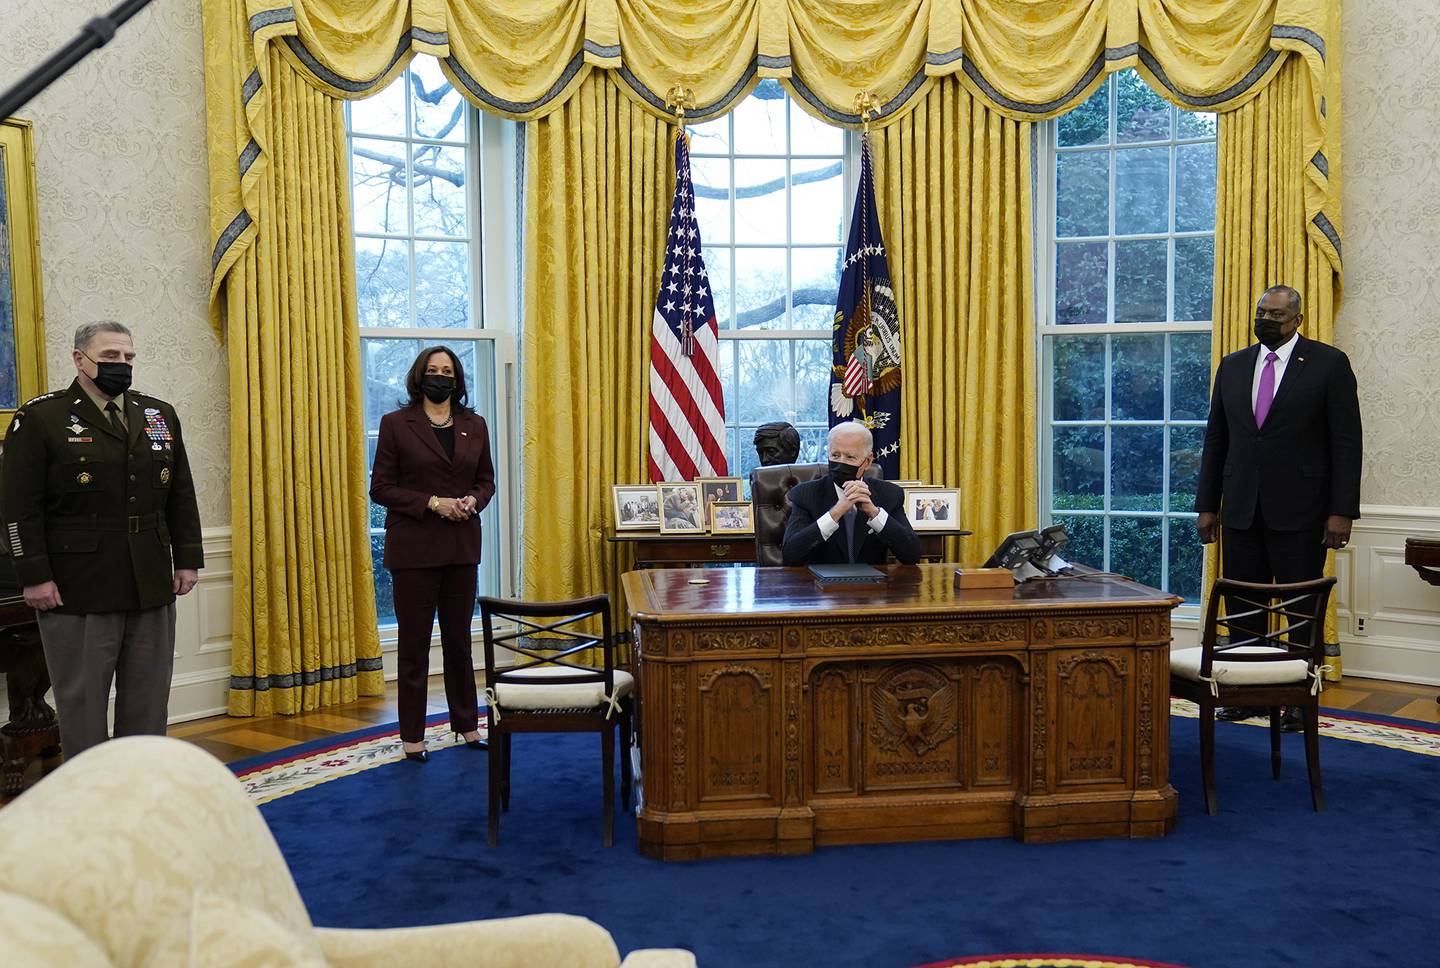 President Joe Biden meets with Secretary of Defense Lloyd Austin, right, Vice President Kamala Harris, and Gen. Mark Milley, chairman of the Joint Chiefs of Staff, left, in the Oval Office of the White House, Monday, Jan. 25, 2021, in Washington.